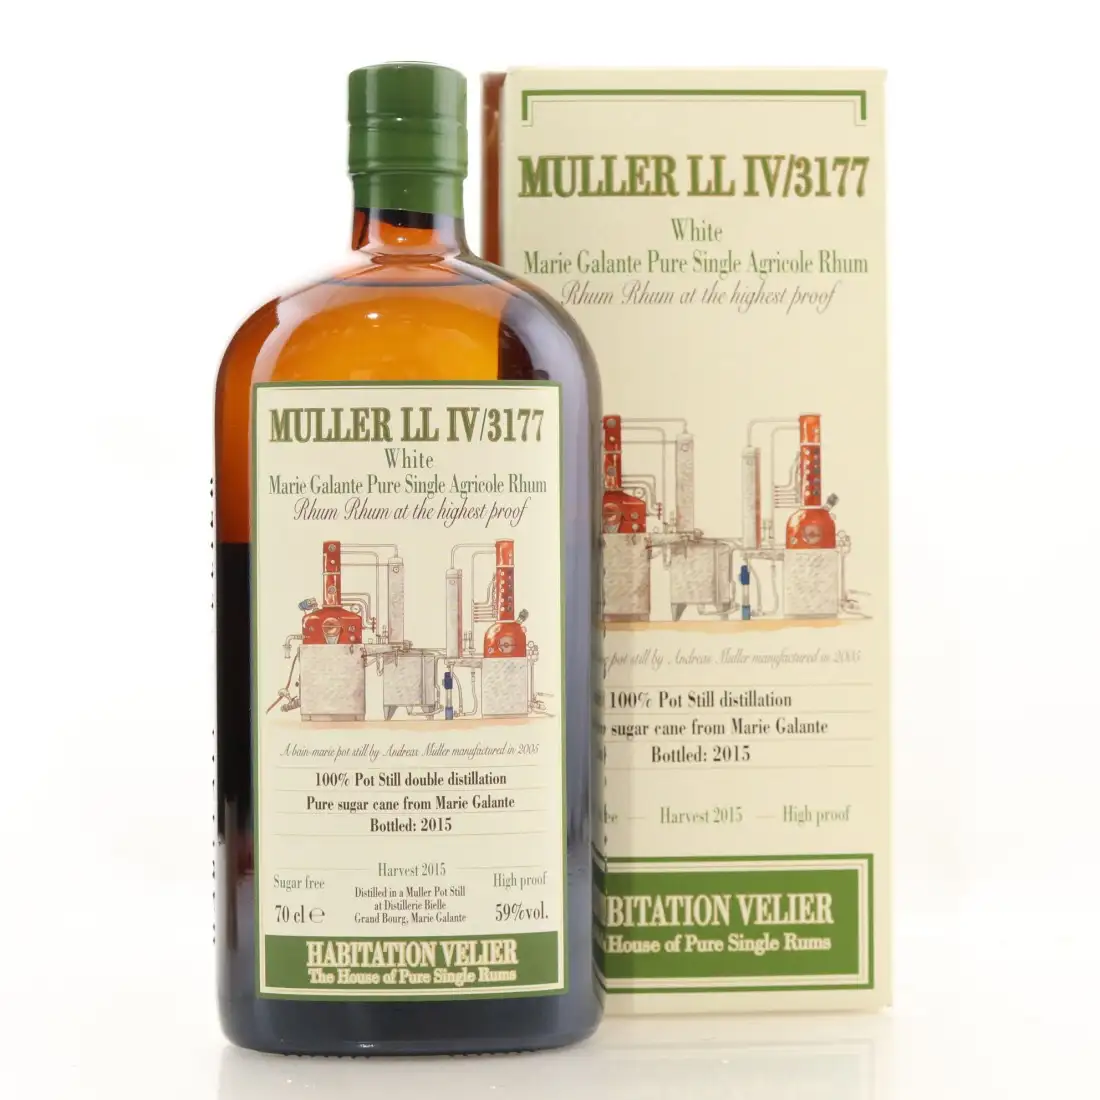 Image of the front of the bottle of the rum Muller LL IV/3177